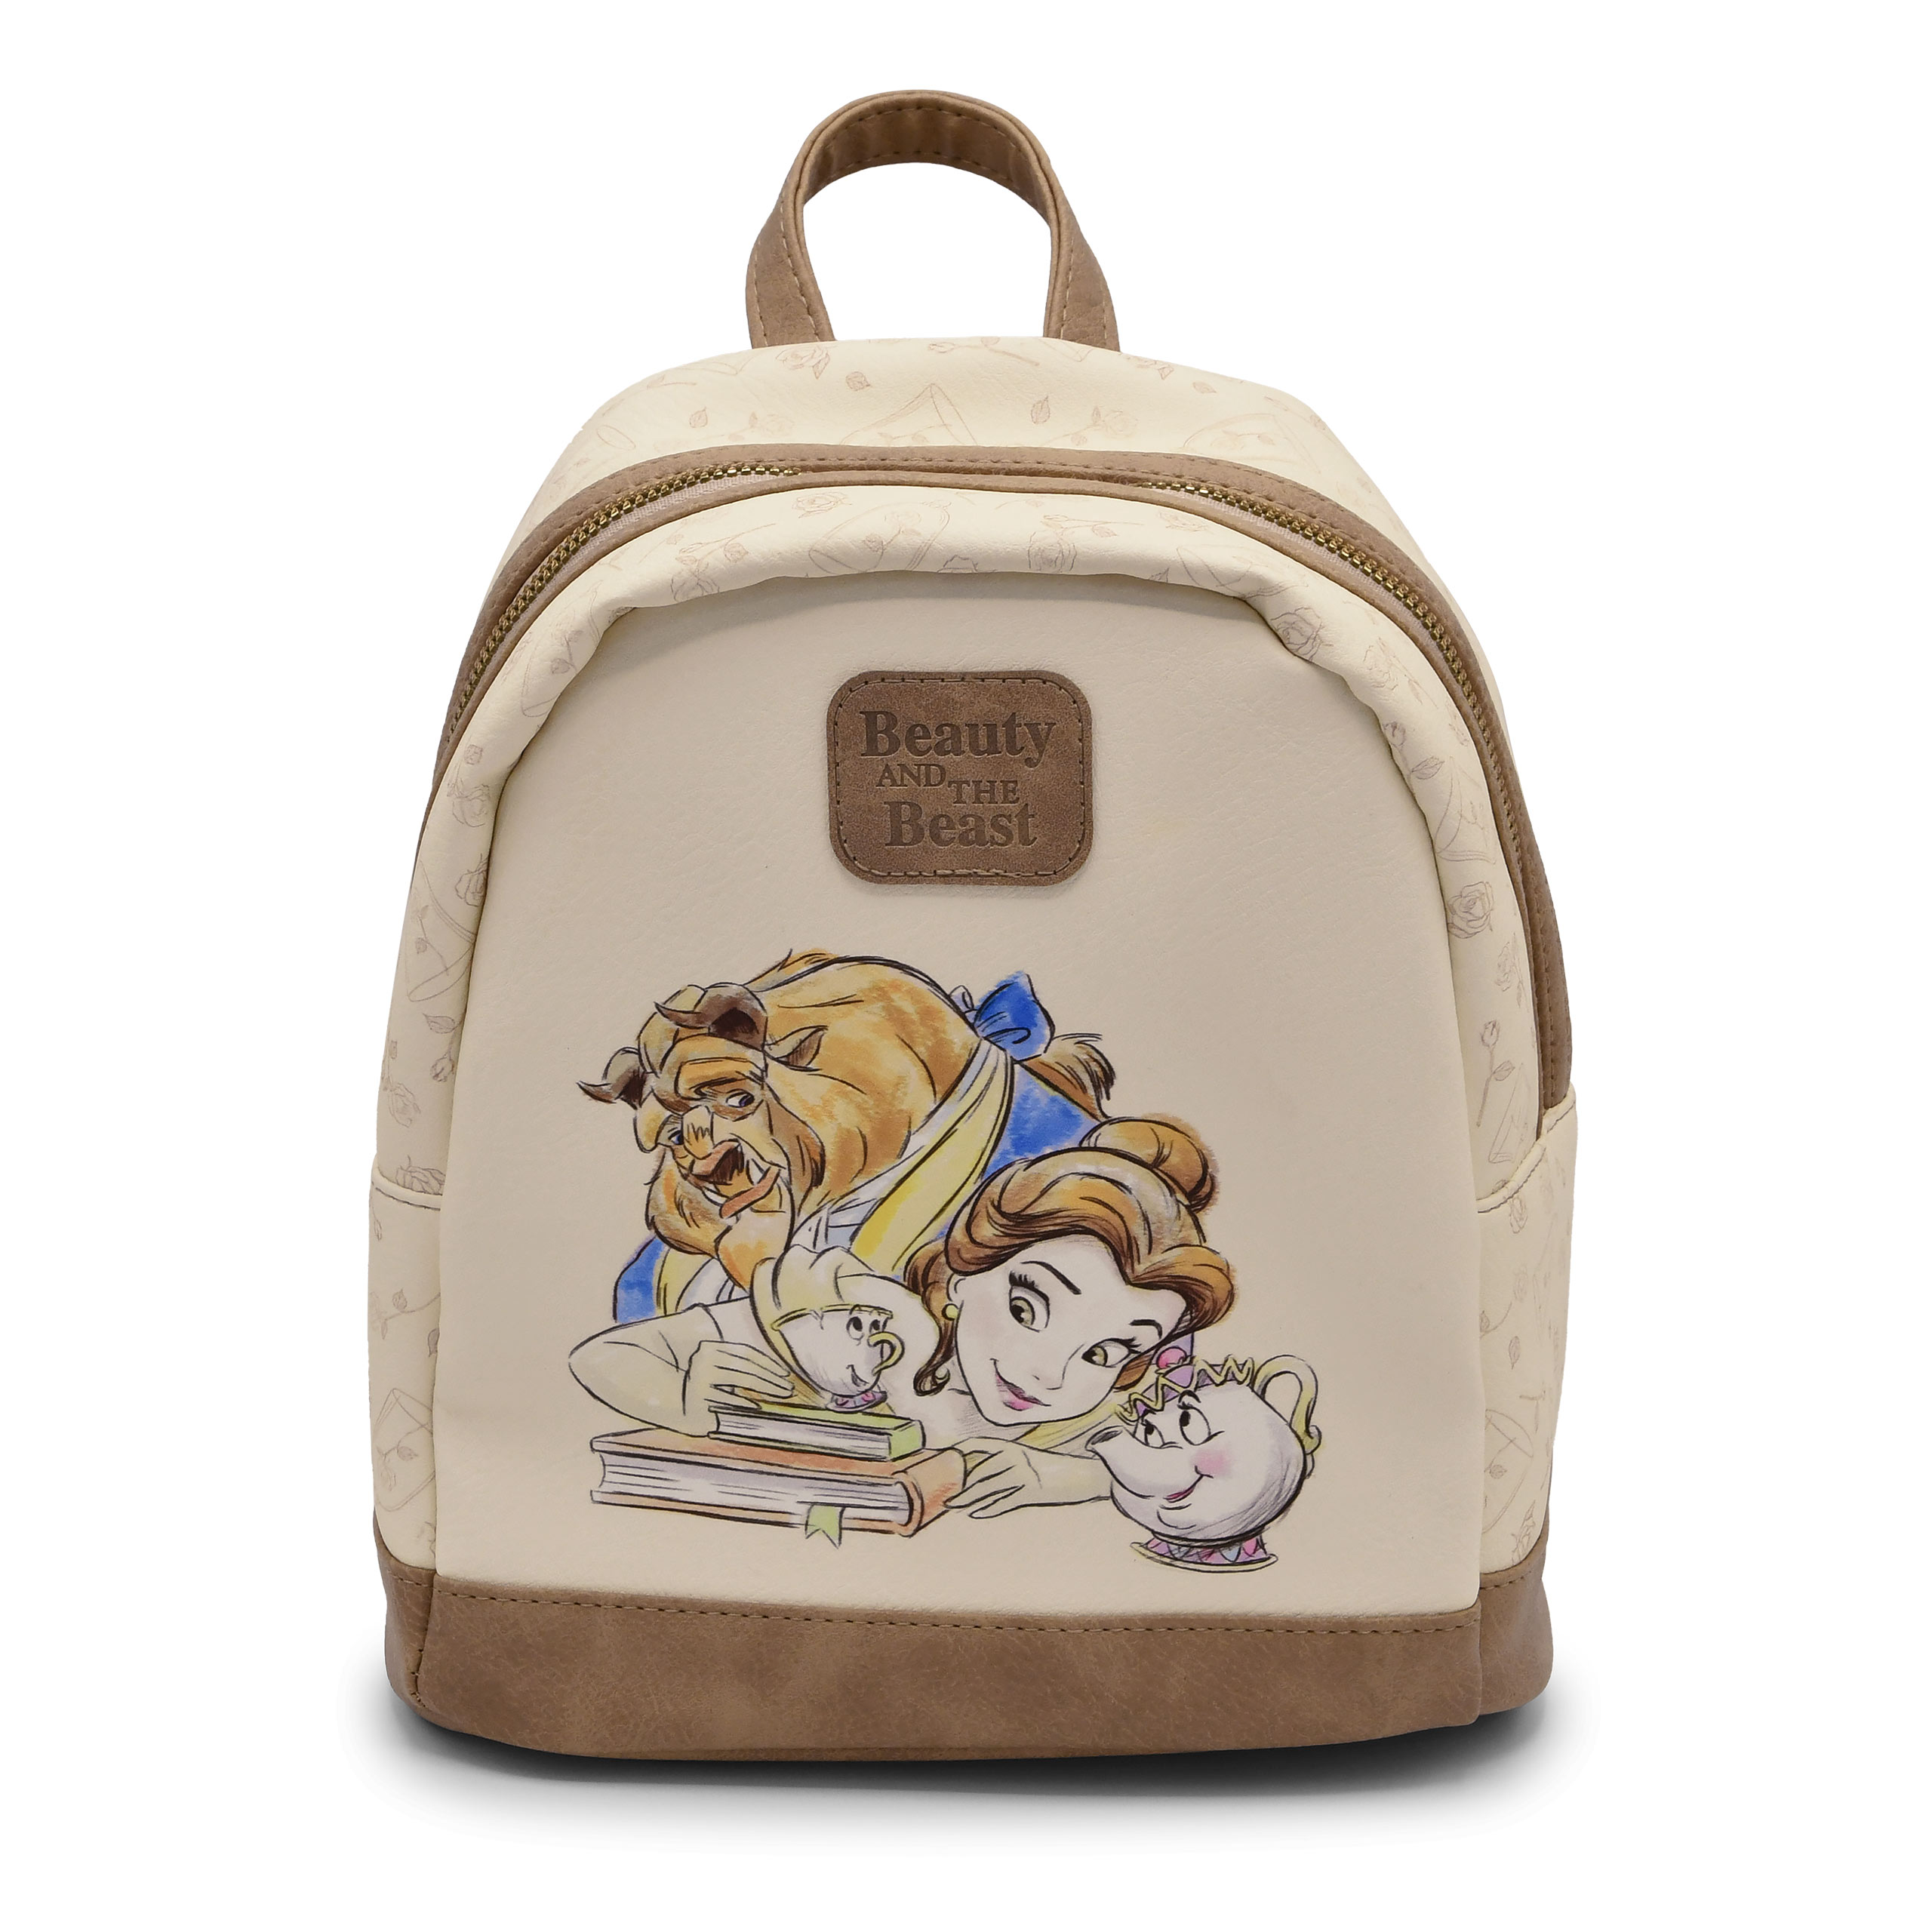 Beauty and the Beast - Belle and Beast Mini Backpack